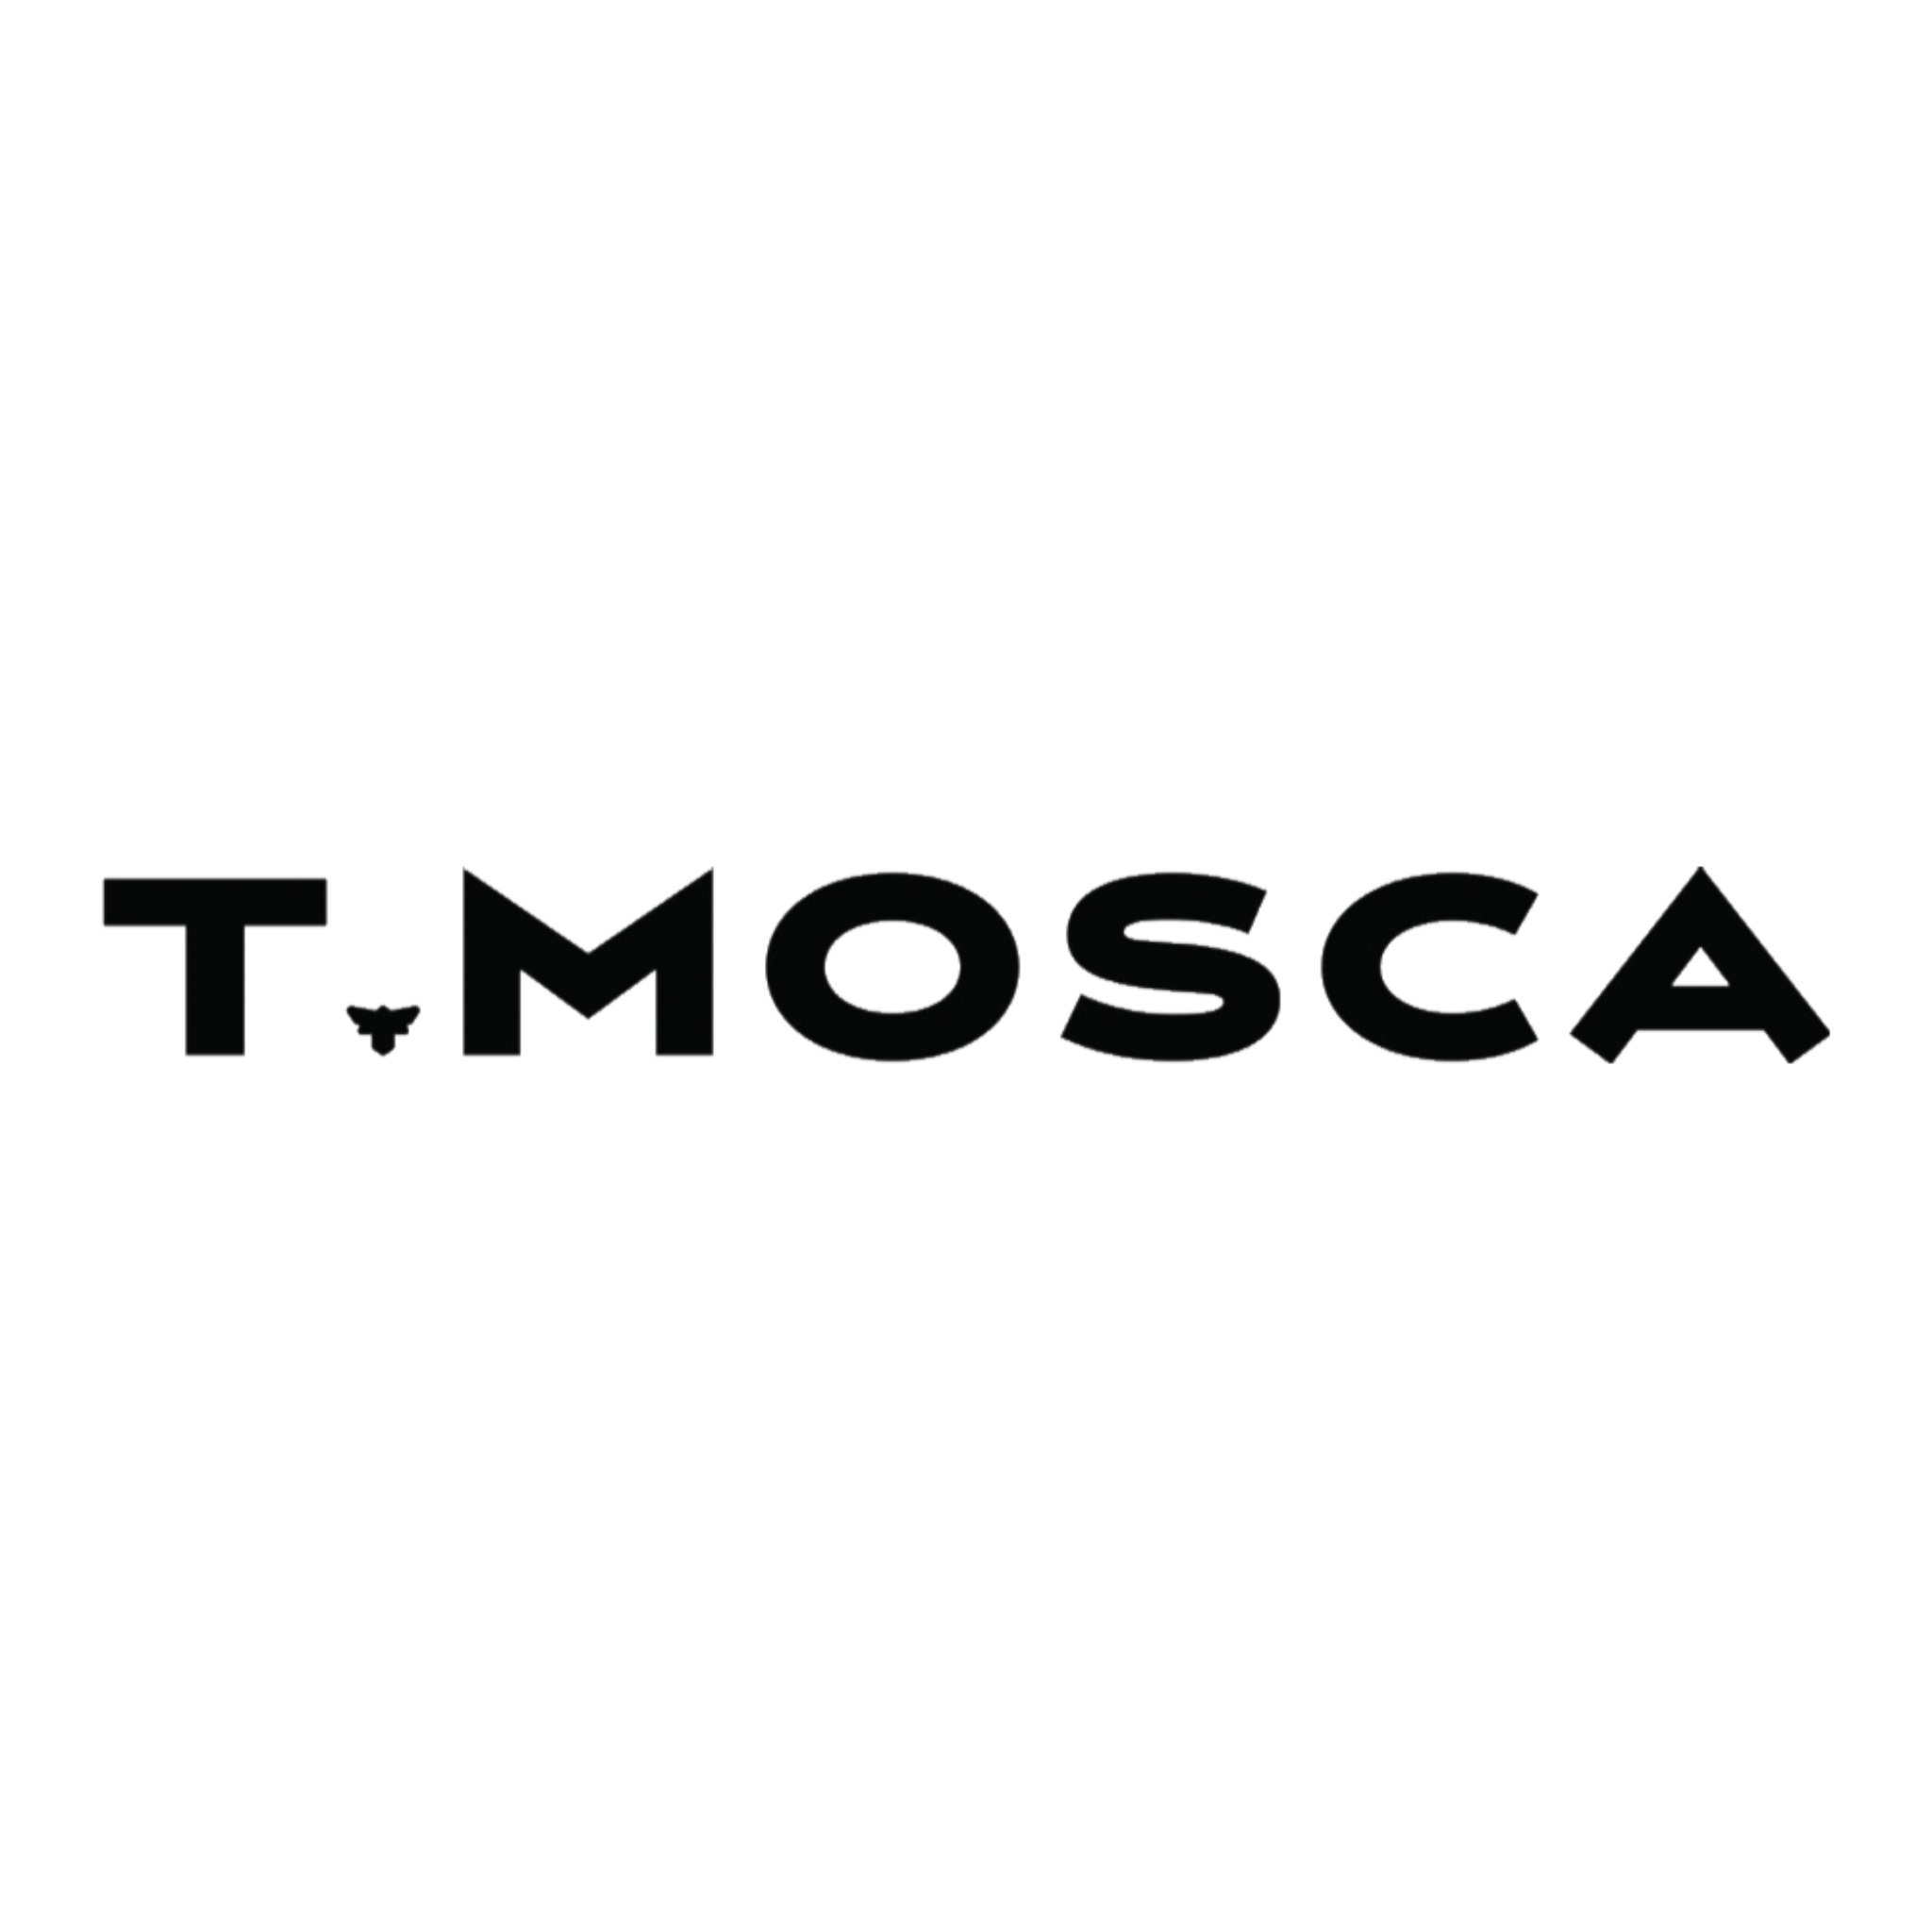 T.Mosca